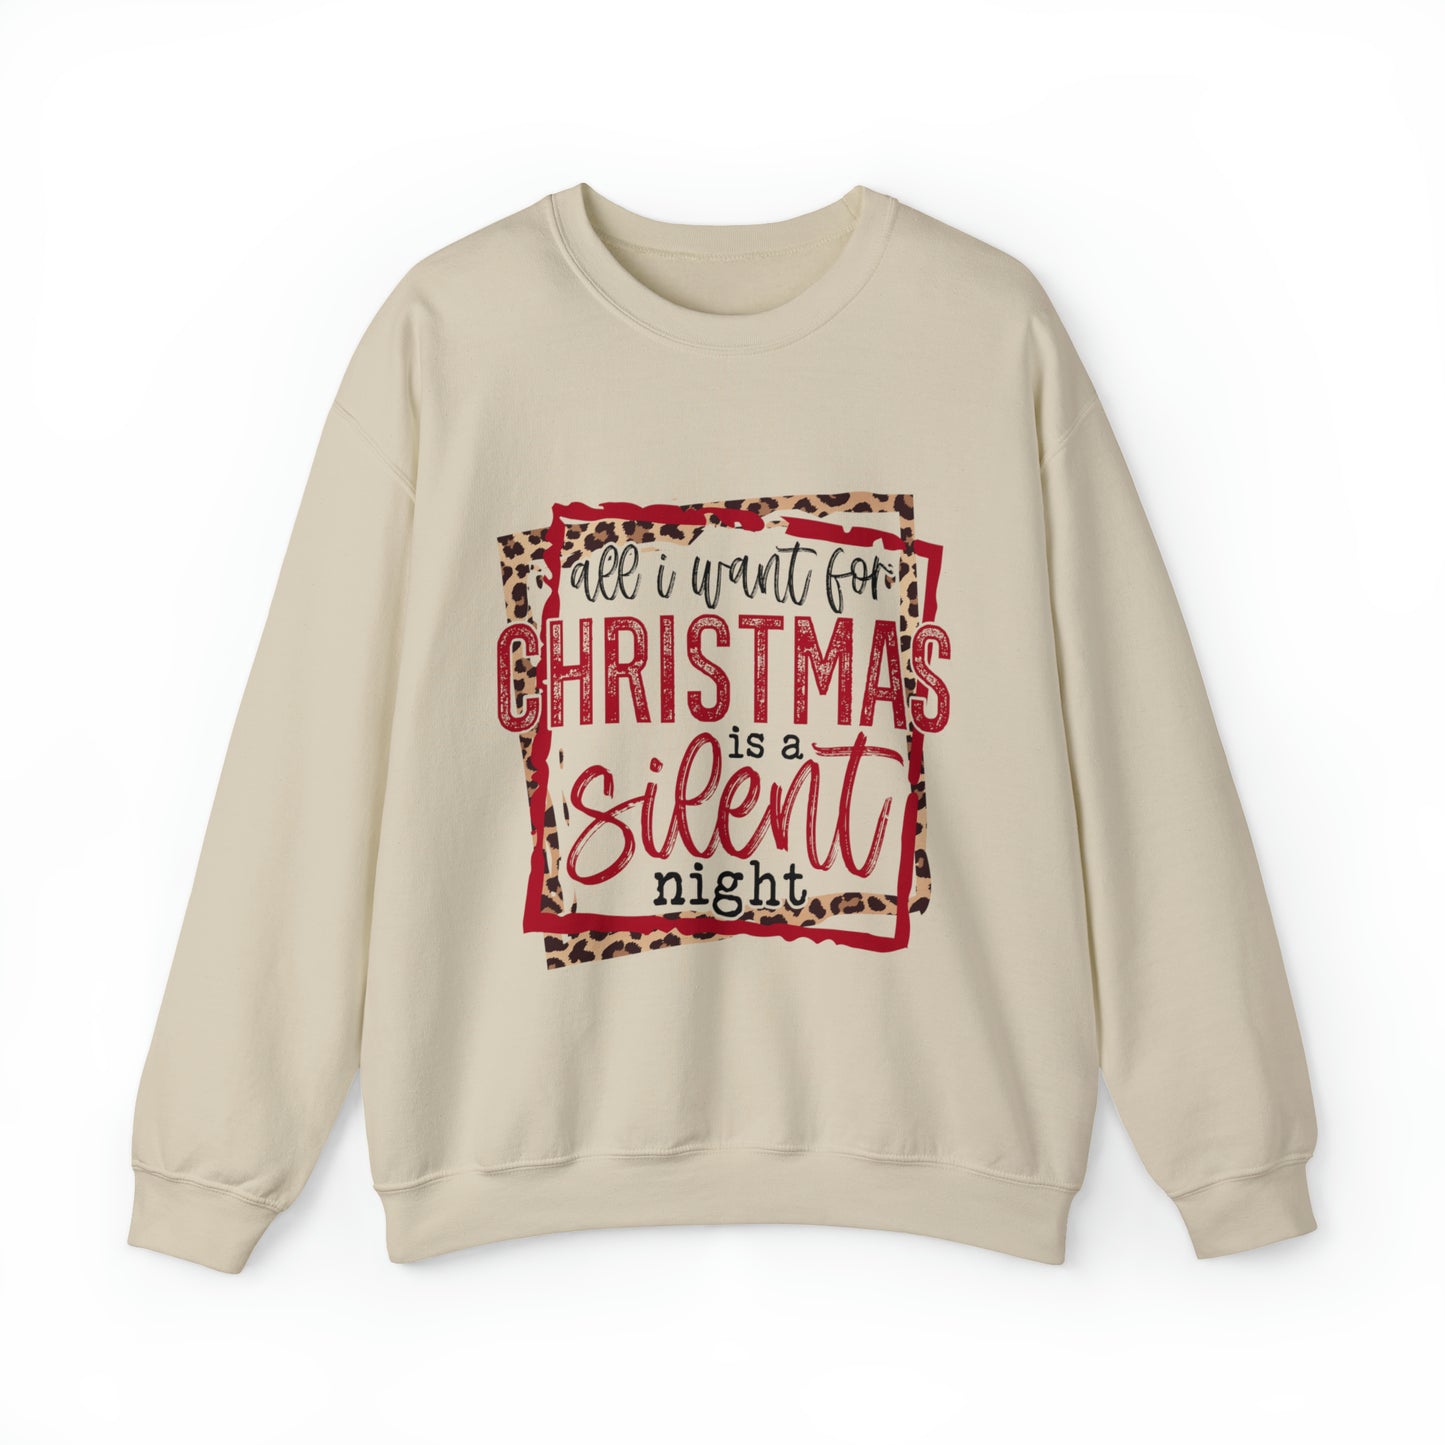 All I Want For Christmas is a Silent Night Women's Christmas Crewneck Sweatshirt